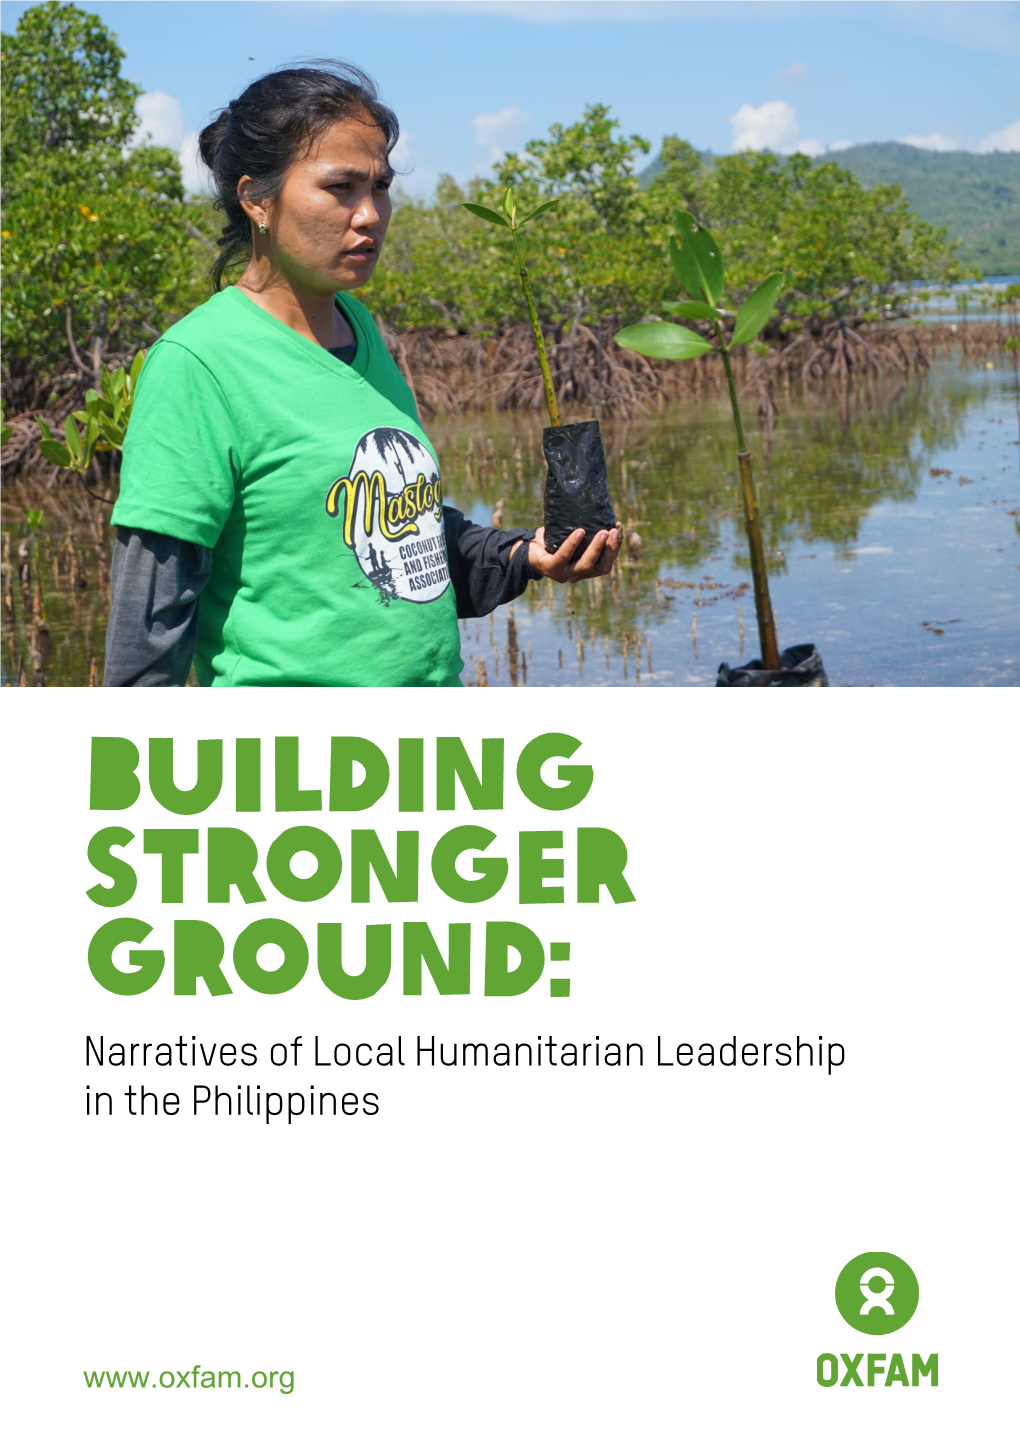 BUILDING STRONGER GROUND: Narratives of Local Humanitarian Leadership in the Philippines